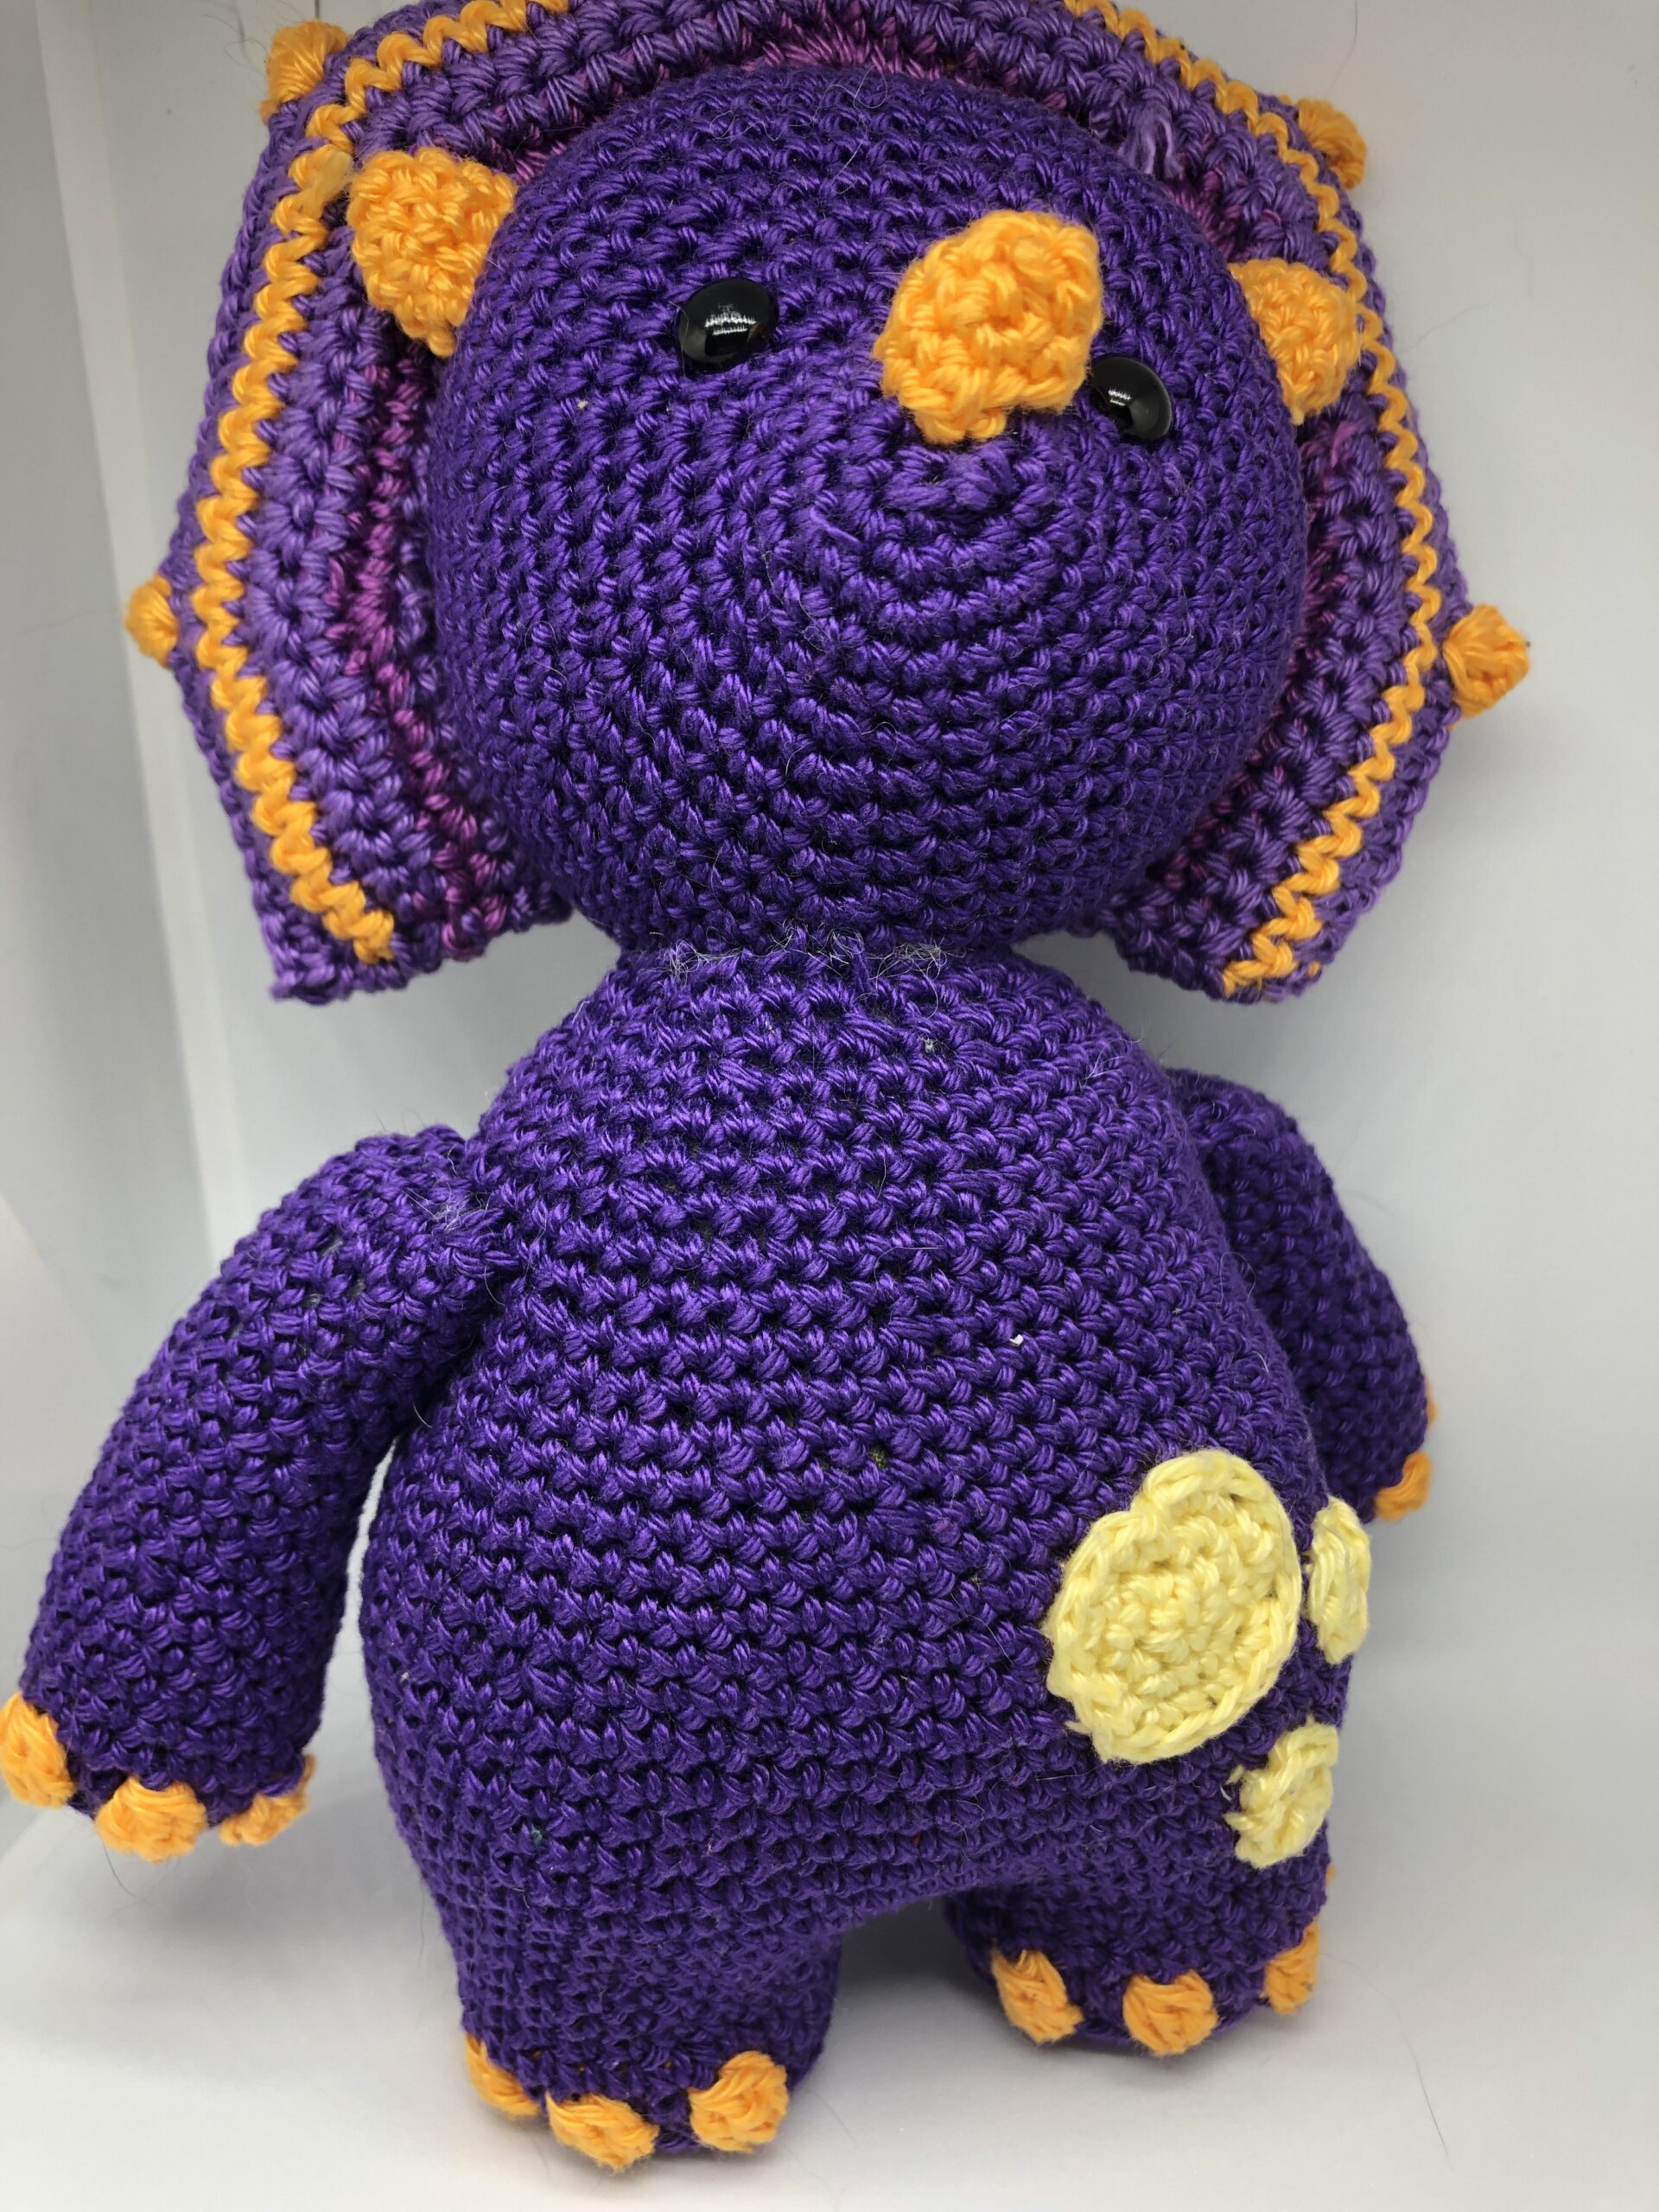 Picture of Tessa the Triceratops a crochet dinosaur amigurumi. Tessa is purple with orange claws and yellow spots. 